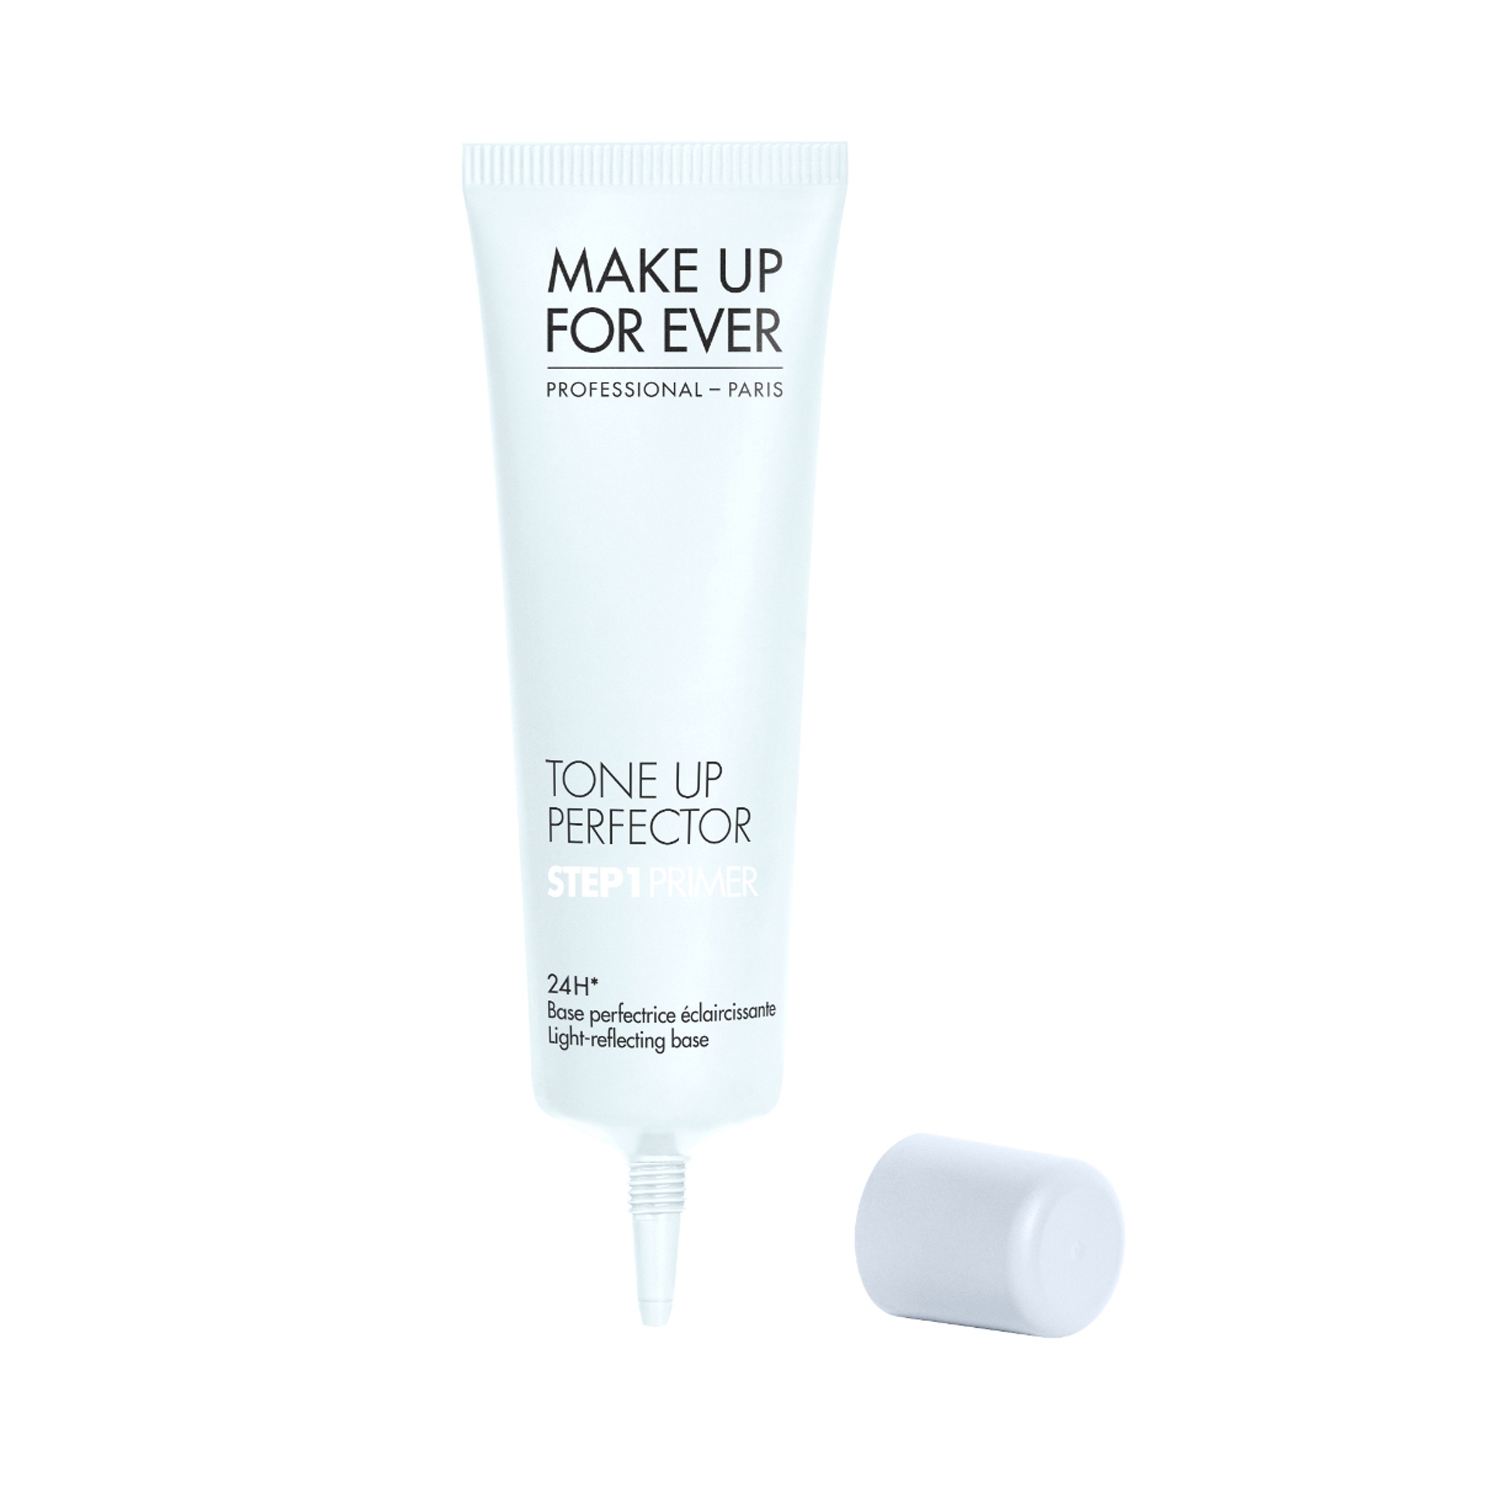 Make Up For Ever | Make Up For Ever Tone Up Perfector Step 1 Primer-24h (30ml)